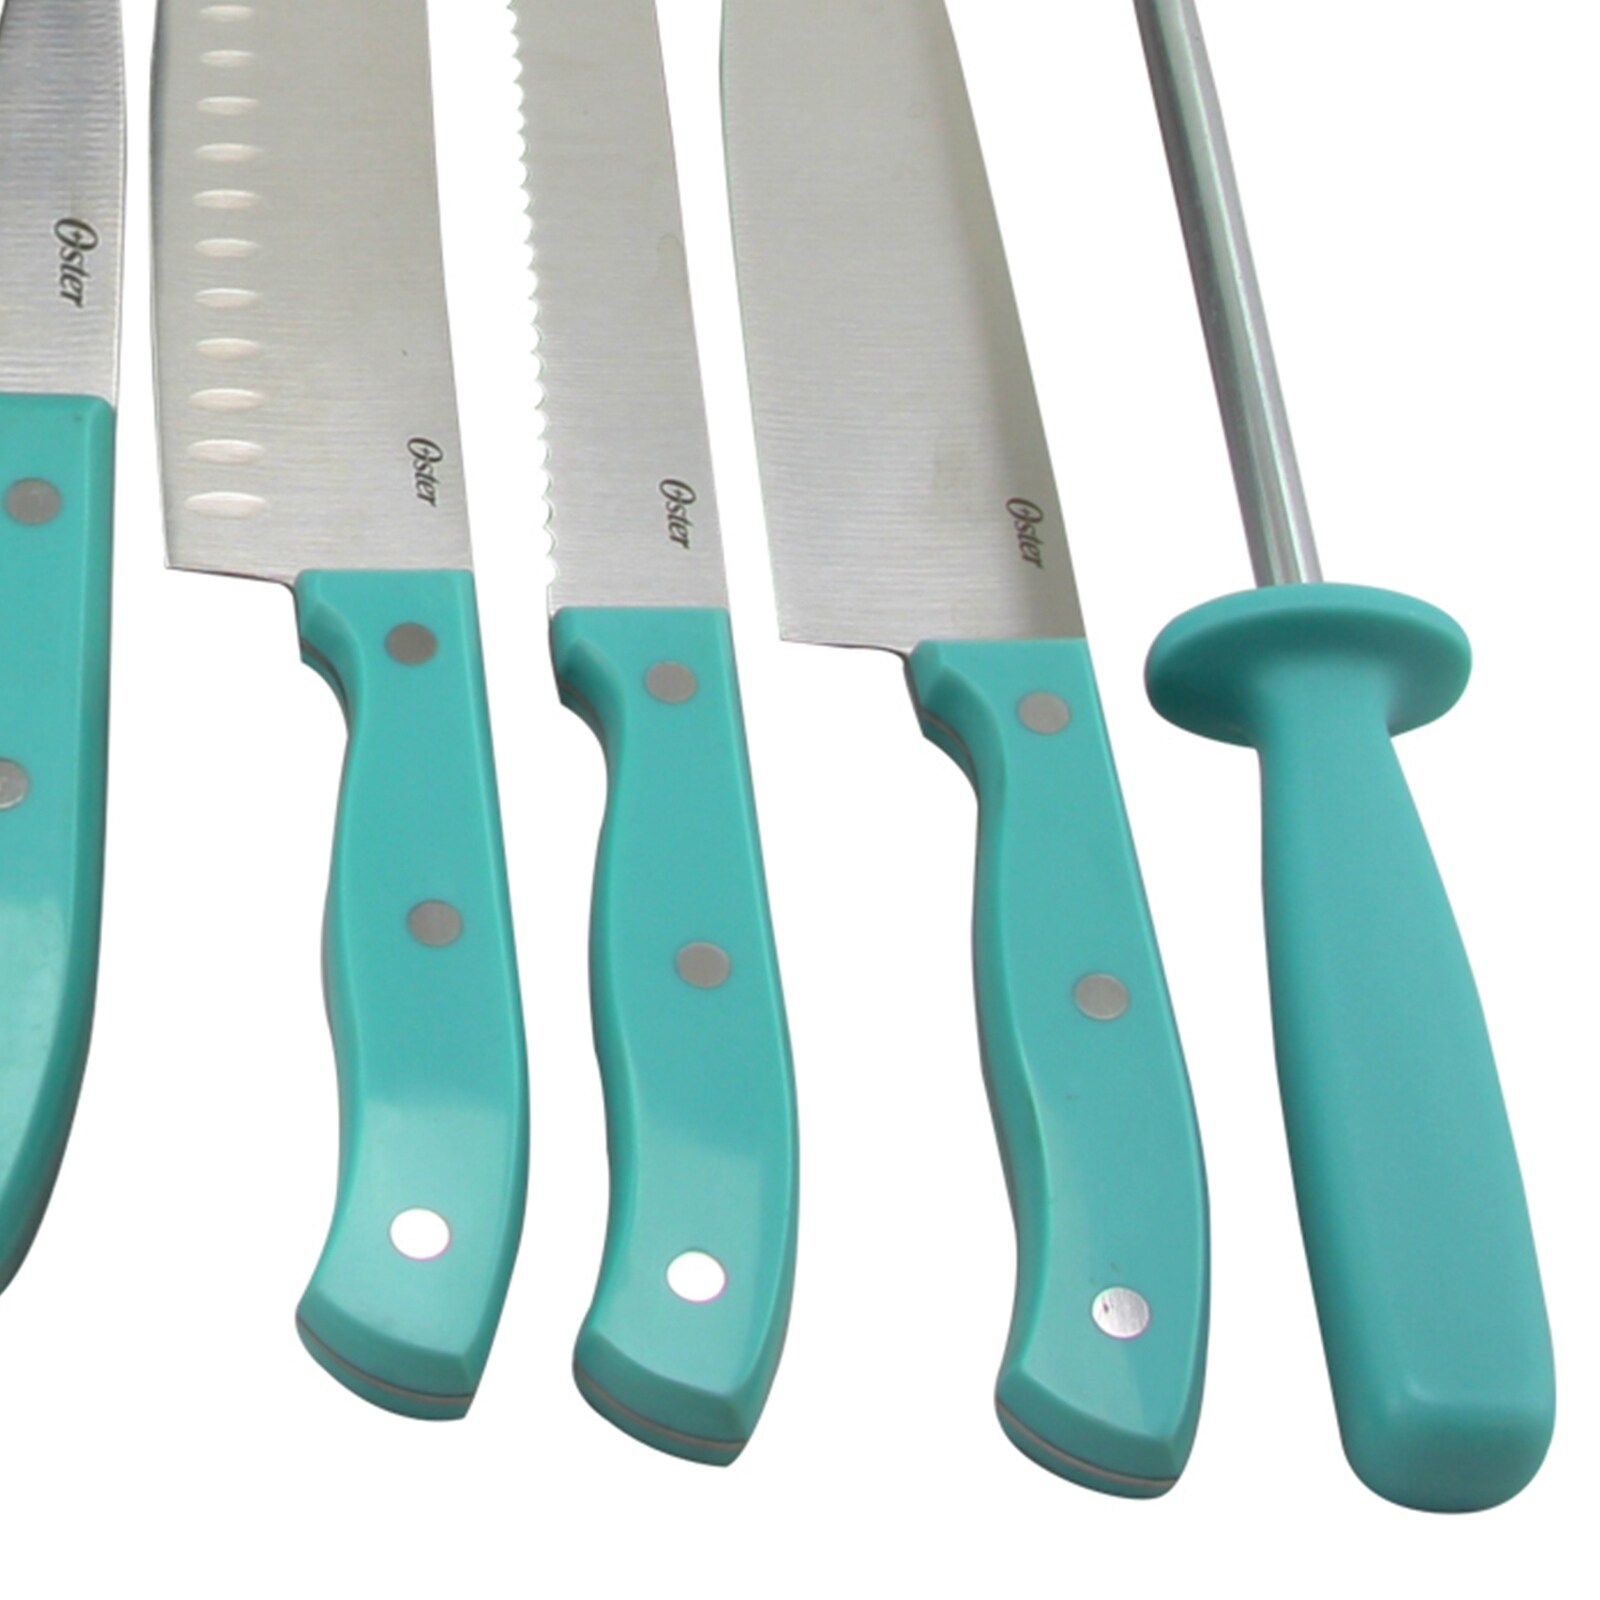 Stainless Steel Cutlery 14 Piece Set in Teal - On Sale - Bed Bath & Beyond  - 37453398